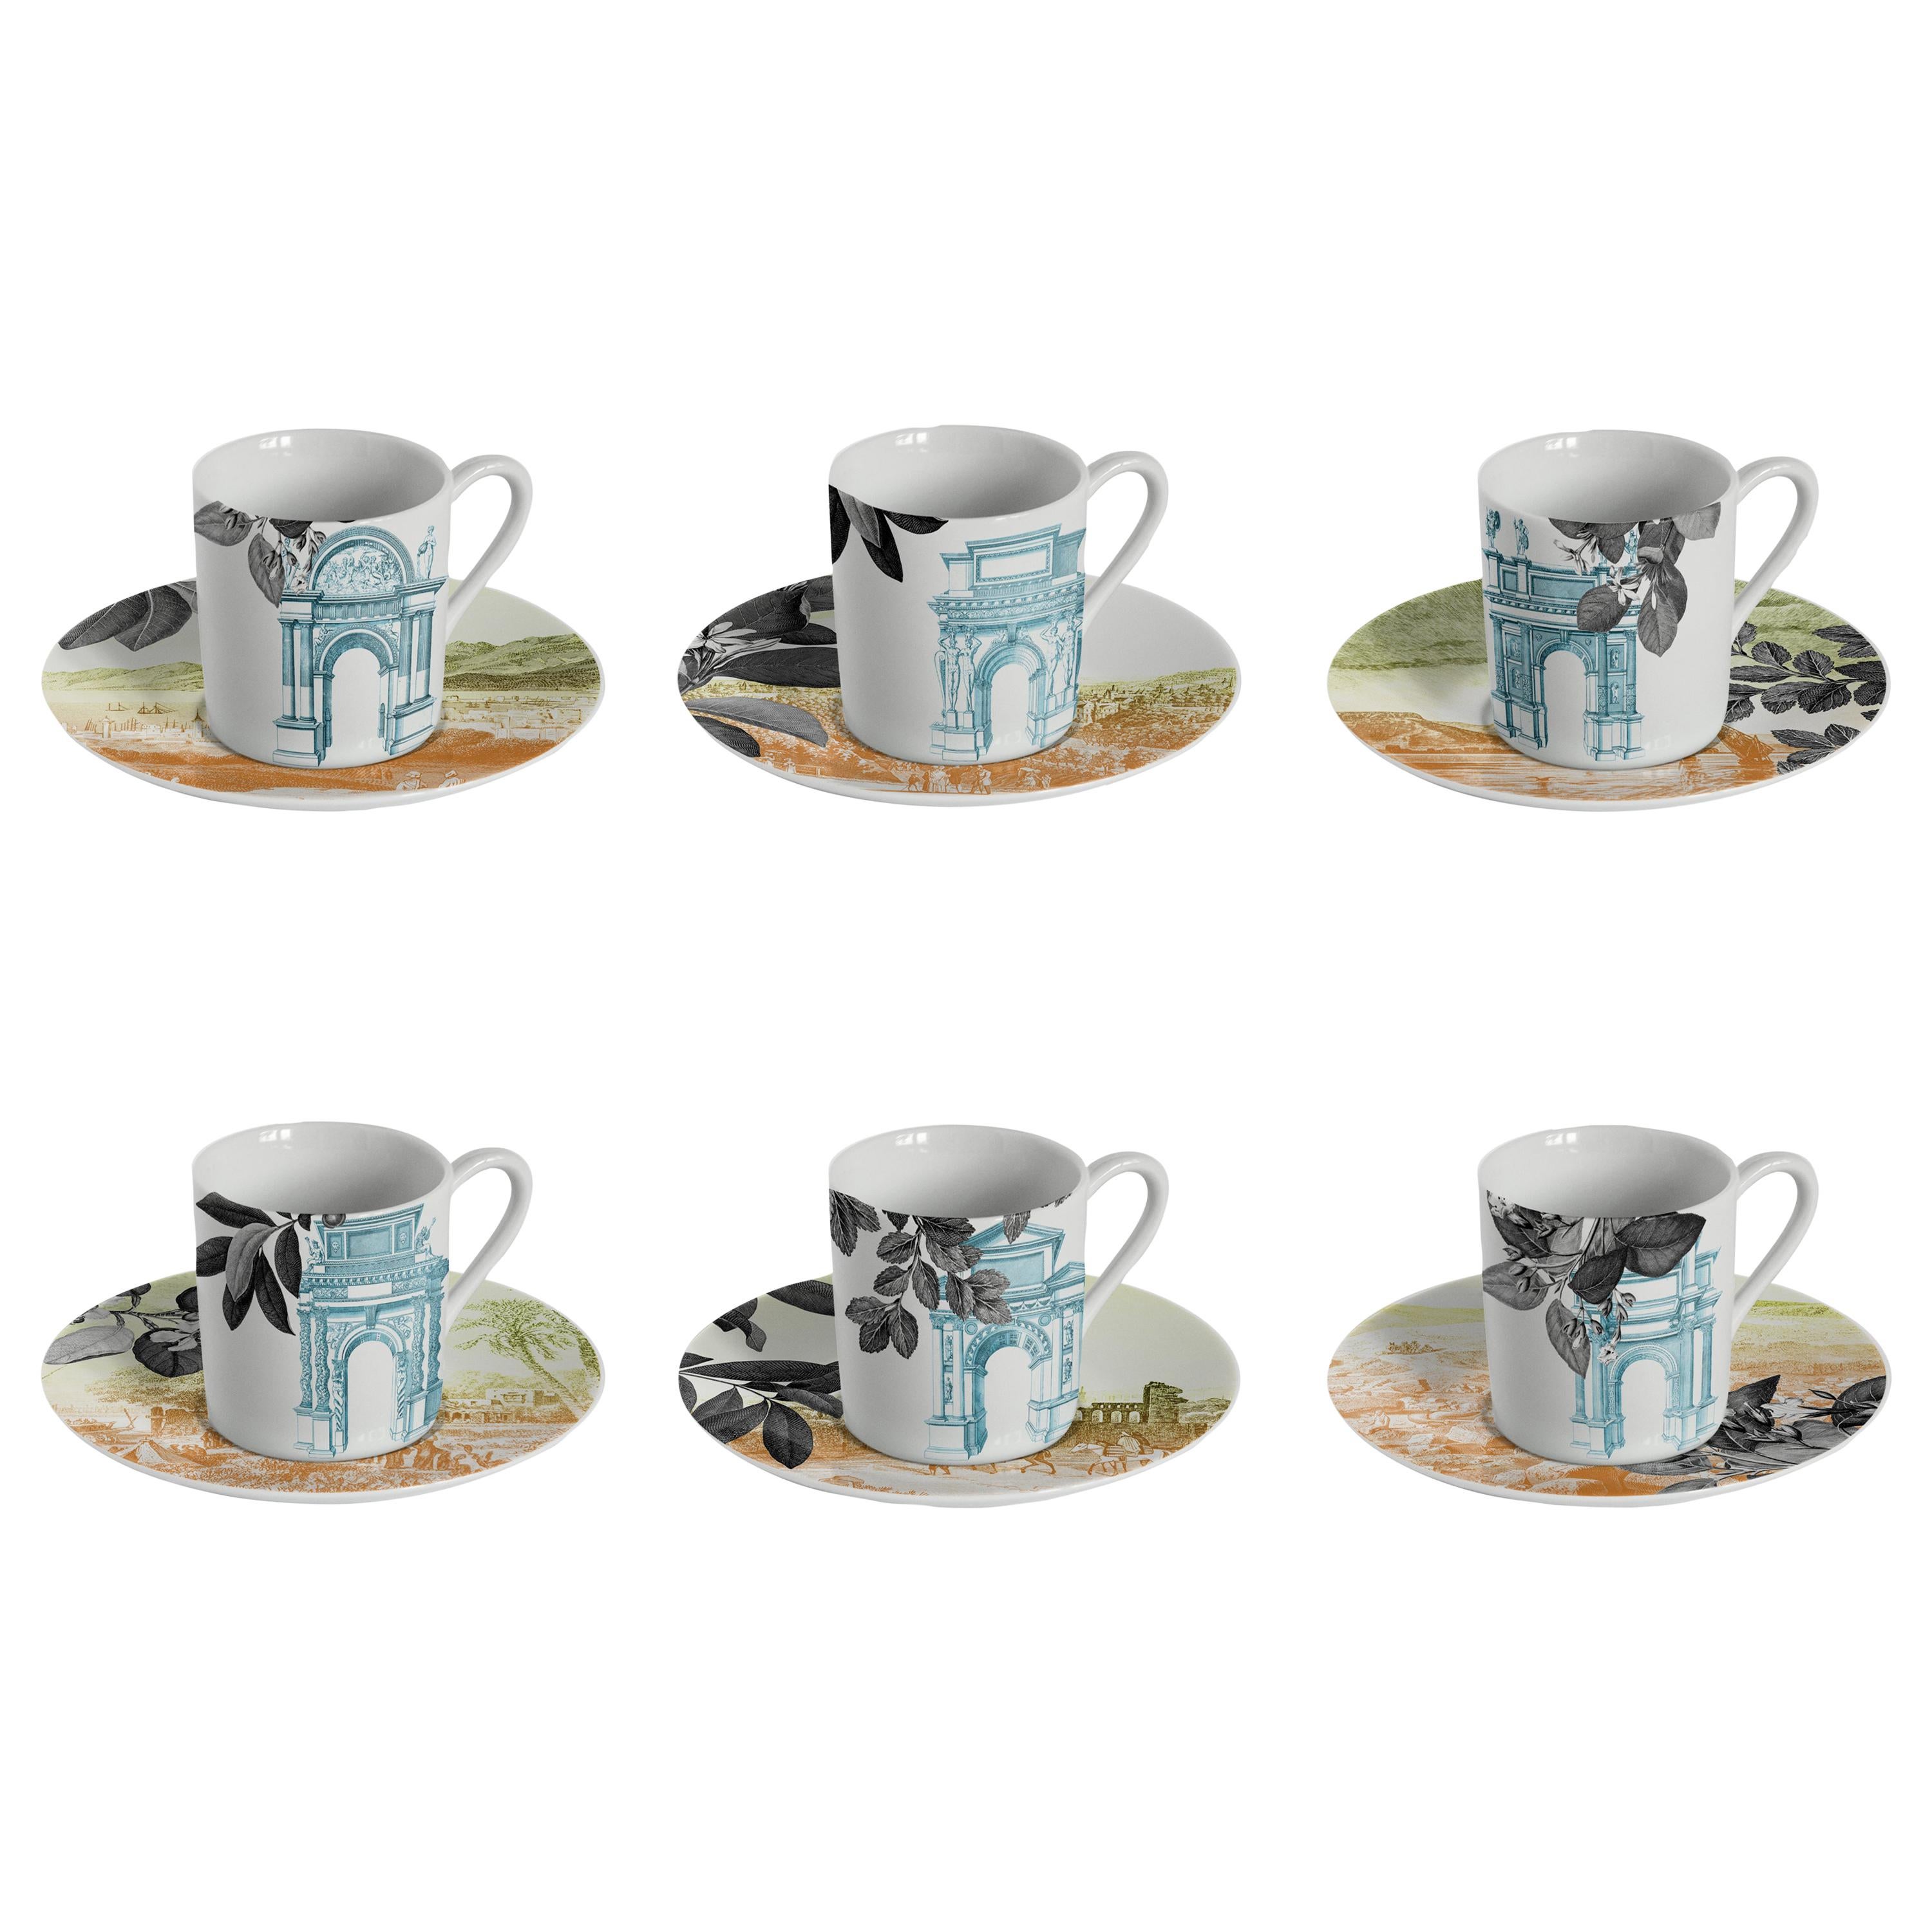 Mediterraneo, Coffee Set with Six Contemporary Porcelains with Decorative Design